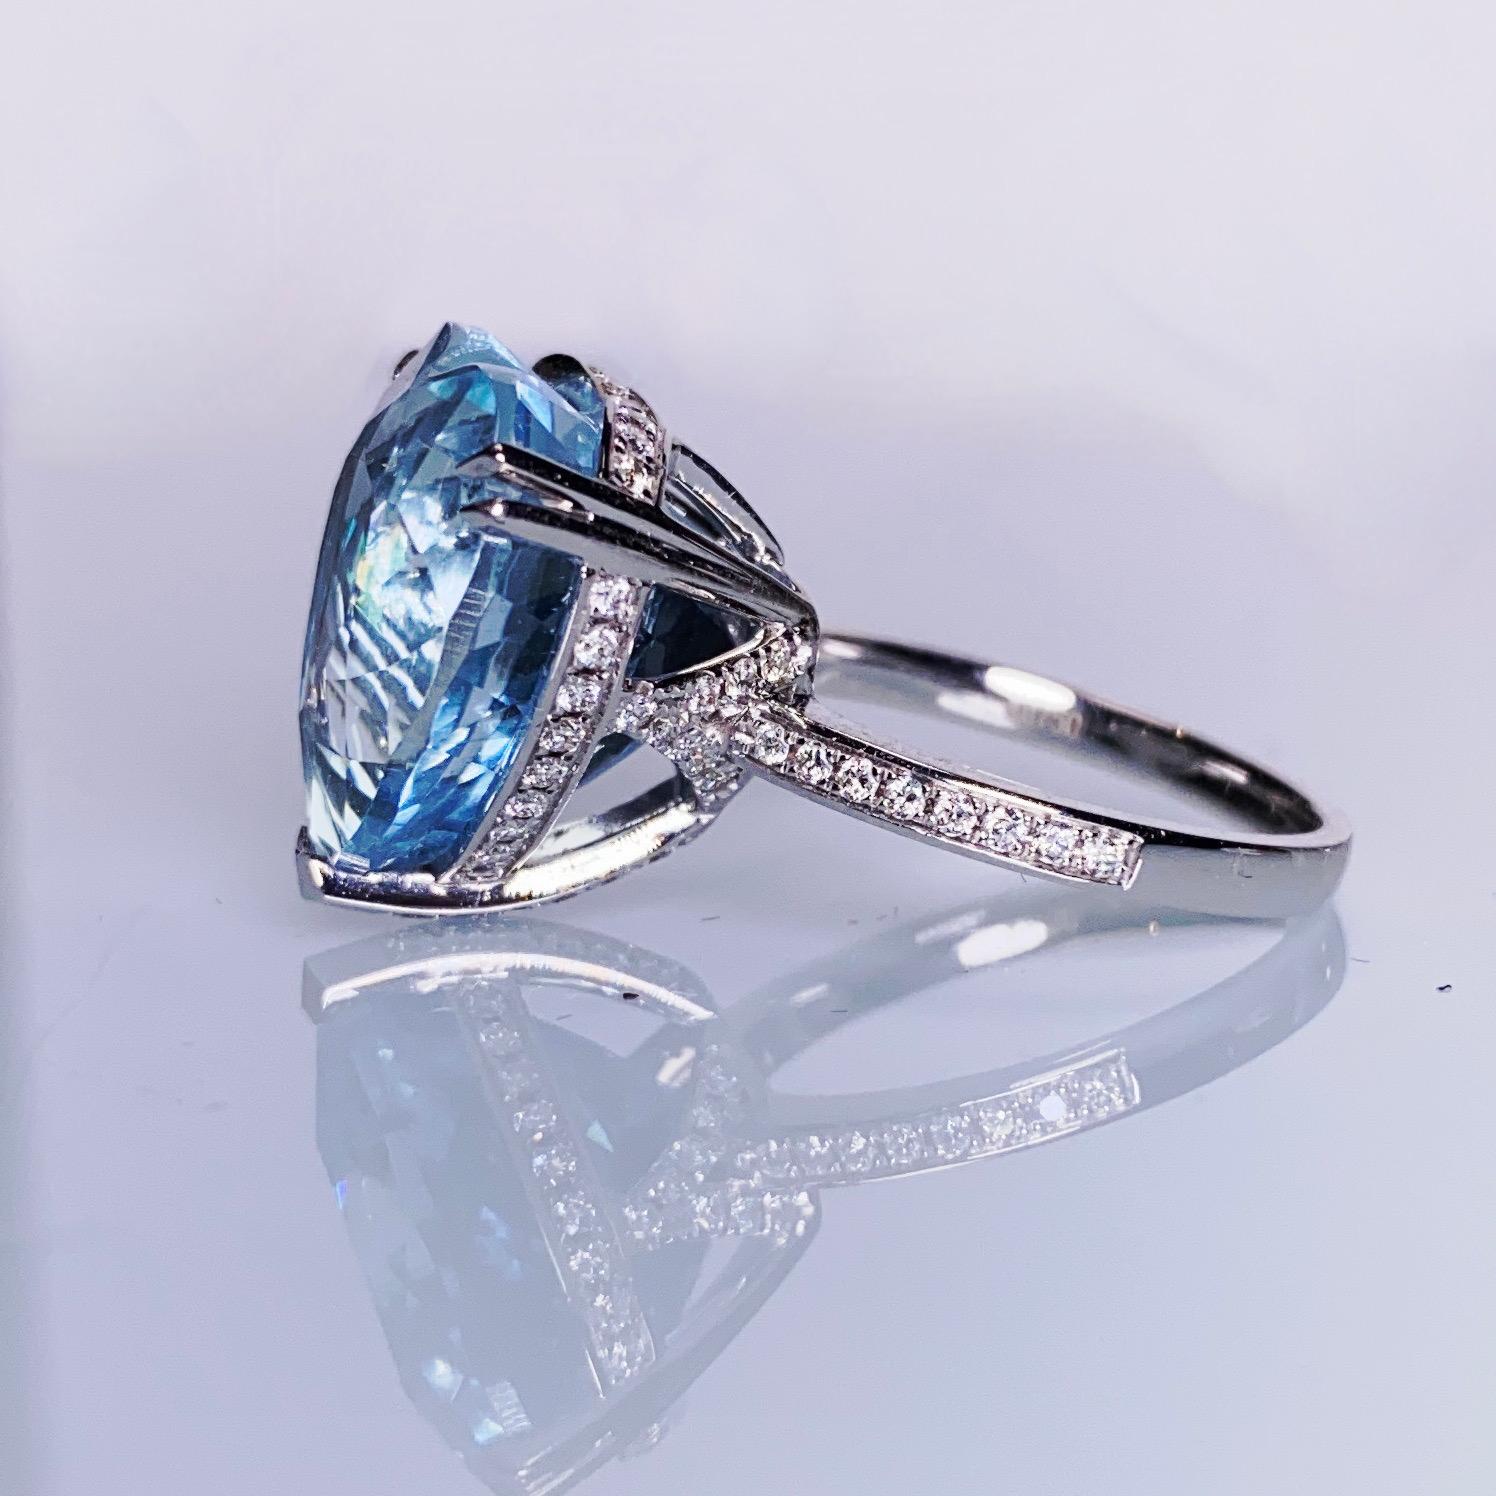 A 16.39 ct Aquamarine and Diamond cocktail Ring in 18k White Gold
It consists of a 16.39 ct transparent Heart shape brilliant cut Aquamarine 
The Aquamarine is in Intense Blue colour, also known as 